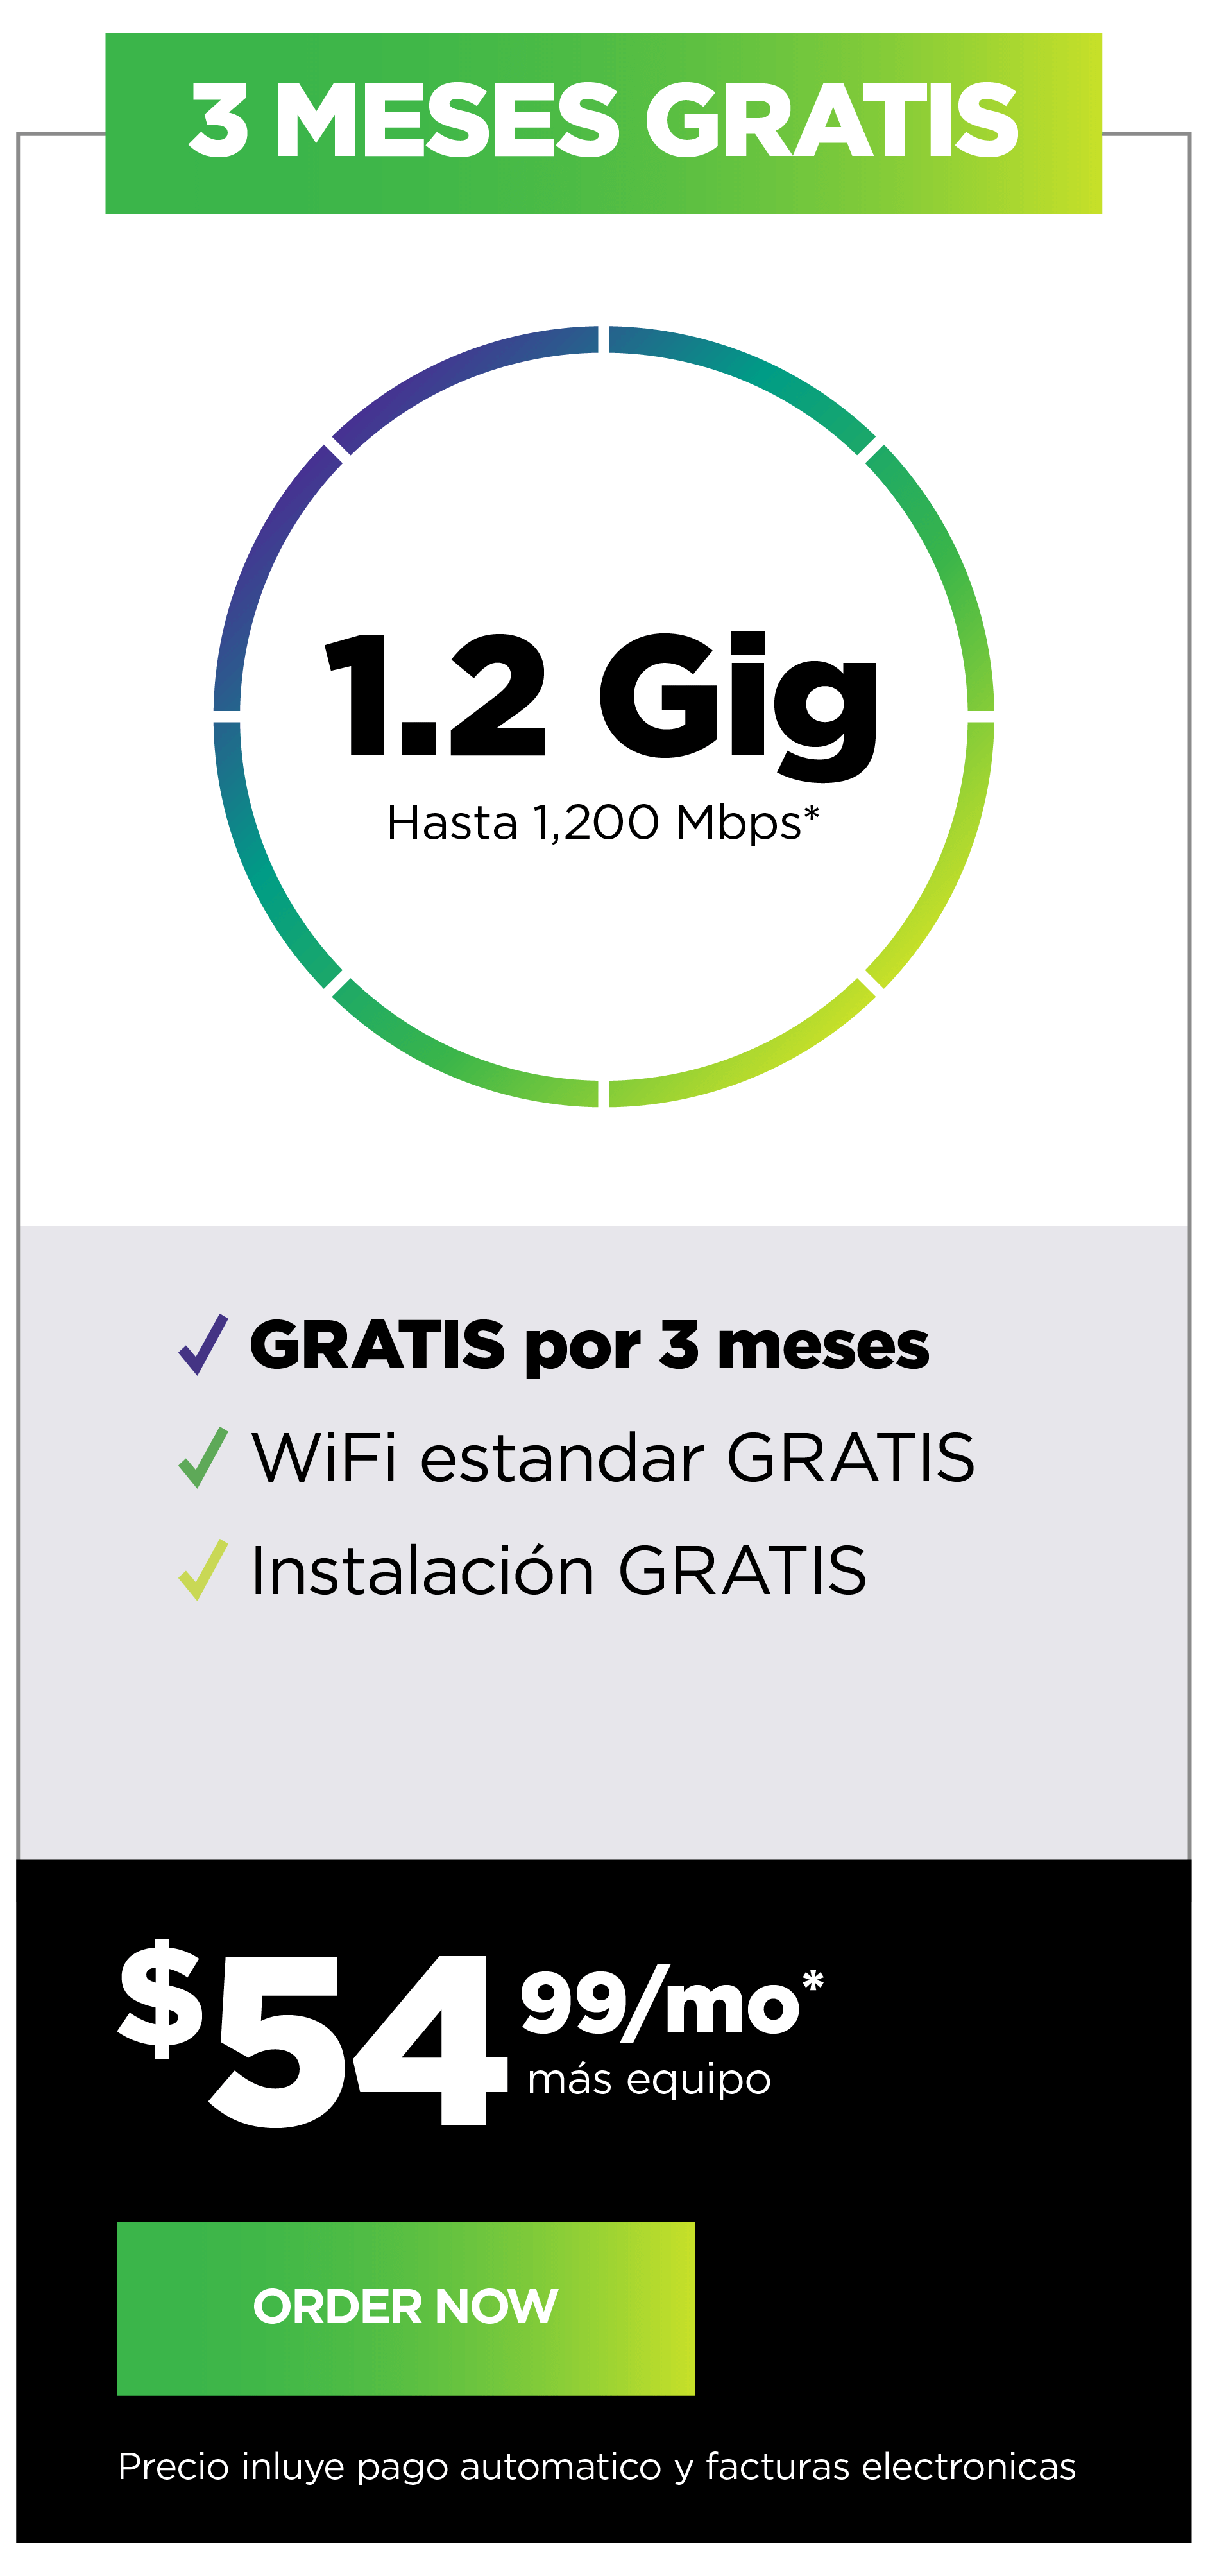 1.2 Gig deal in Spanish